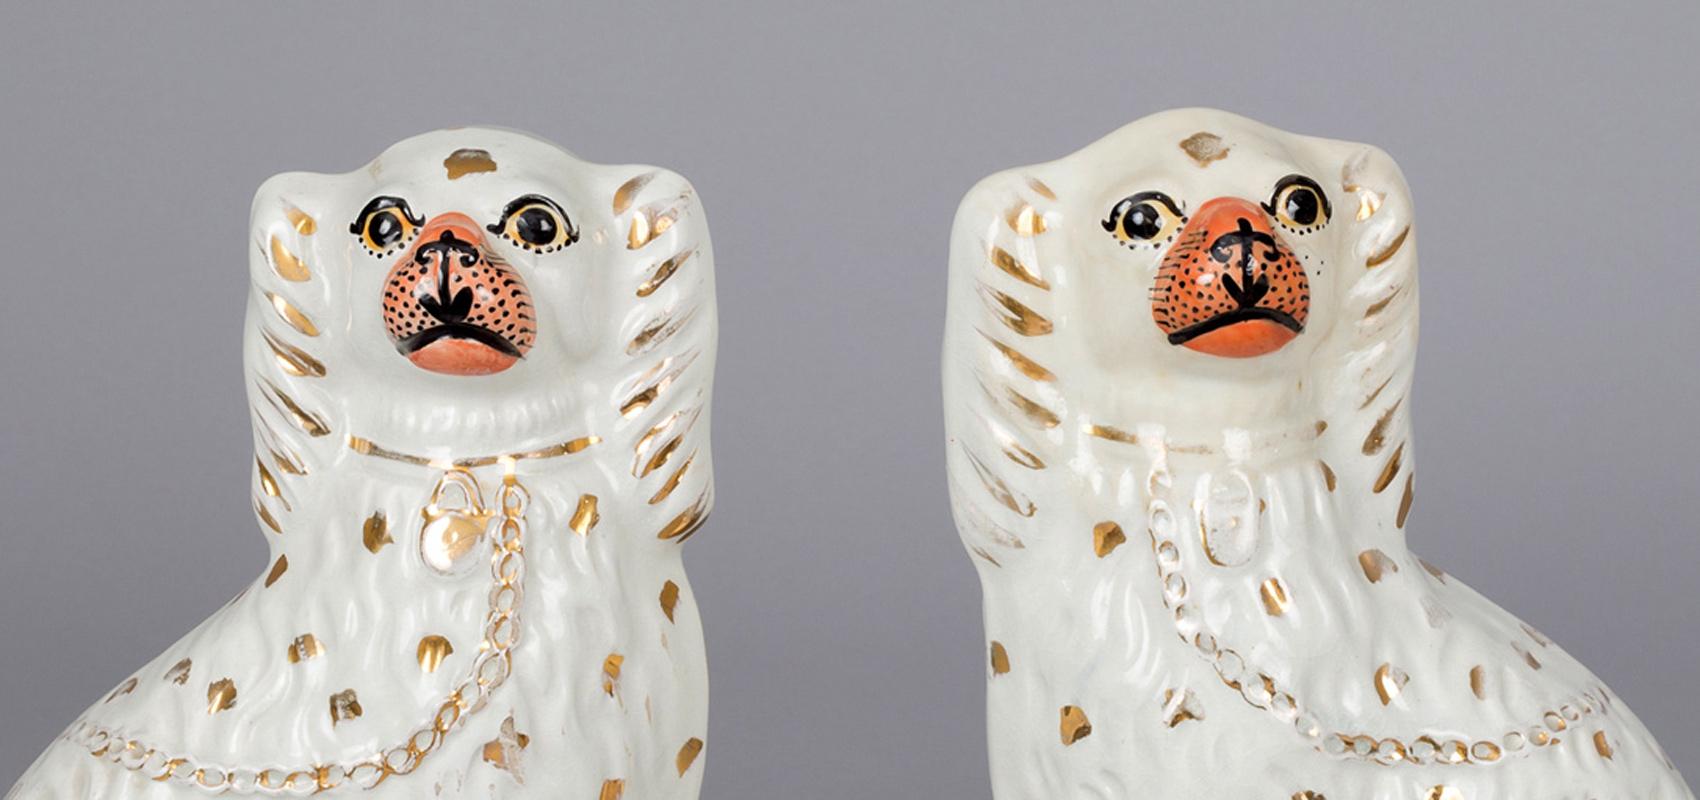 Pair of charming white Staffordshire dogs with flesh colored noses, gilded spots, collar and chain.